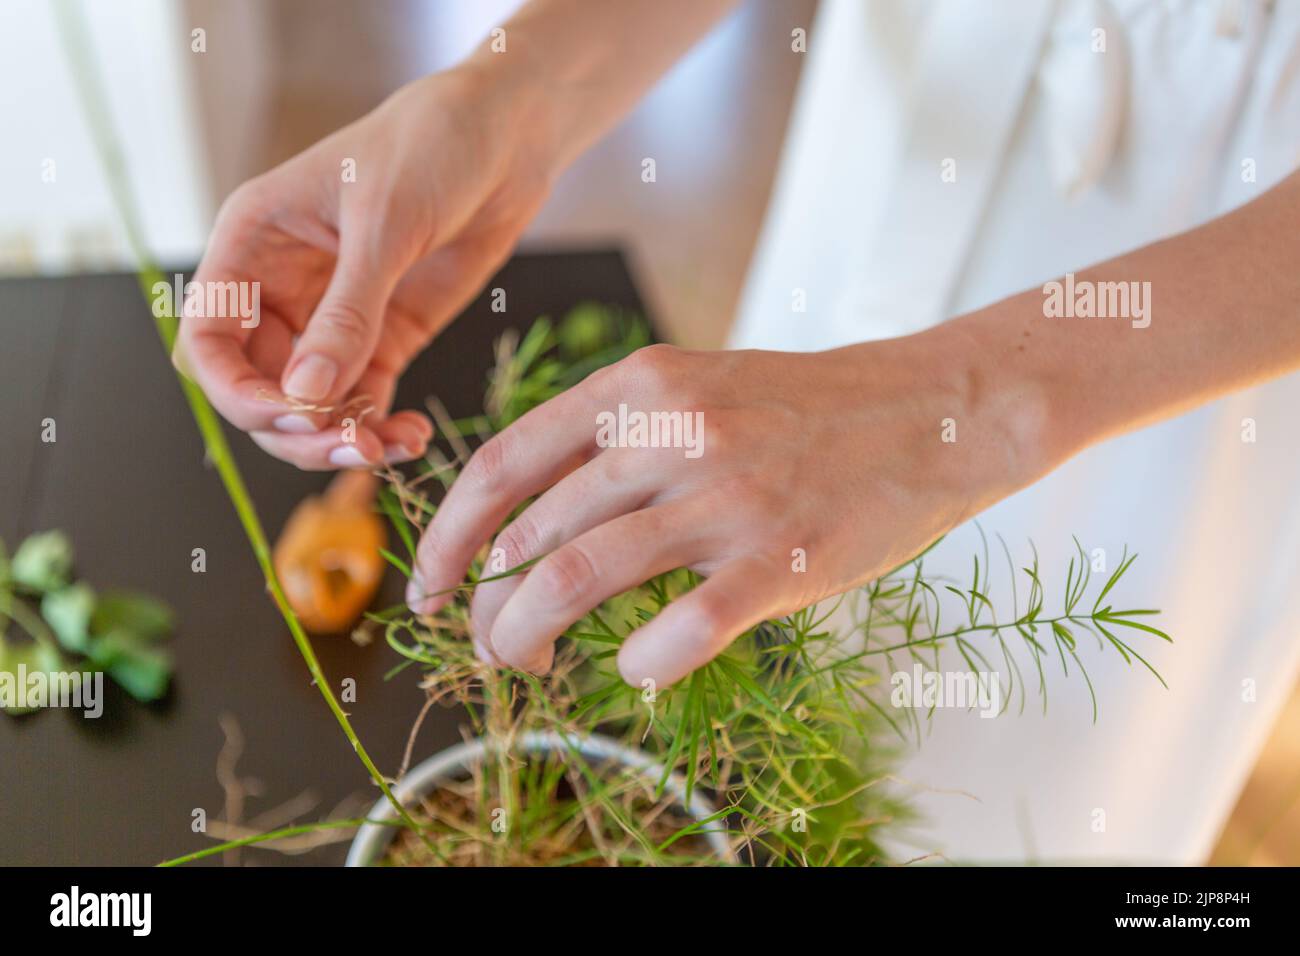 Woman hands planting a green plant at home. Stock Photo